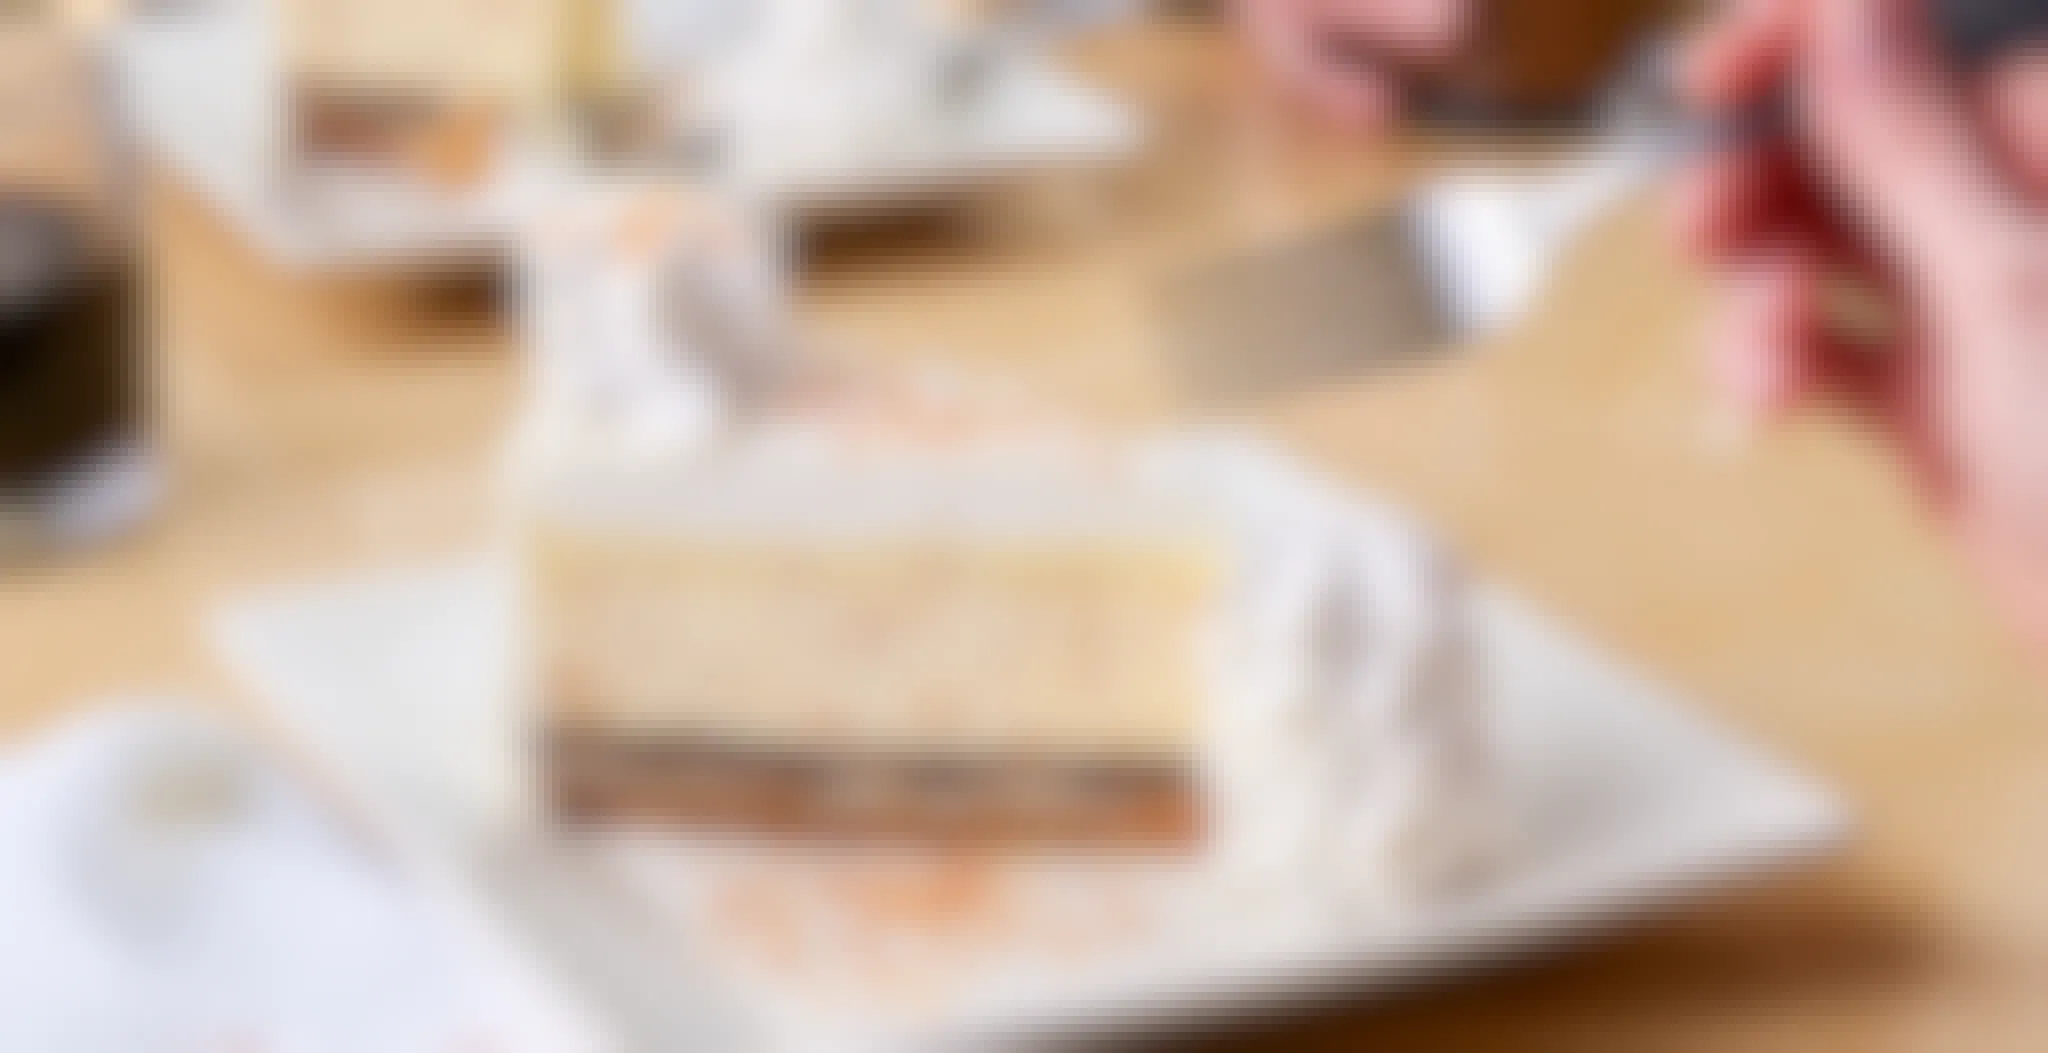 National Cheesecake Day on July 30 Saw 50% Off Cheesecake at Cheesecake Factory